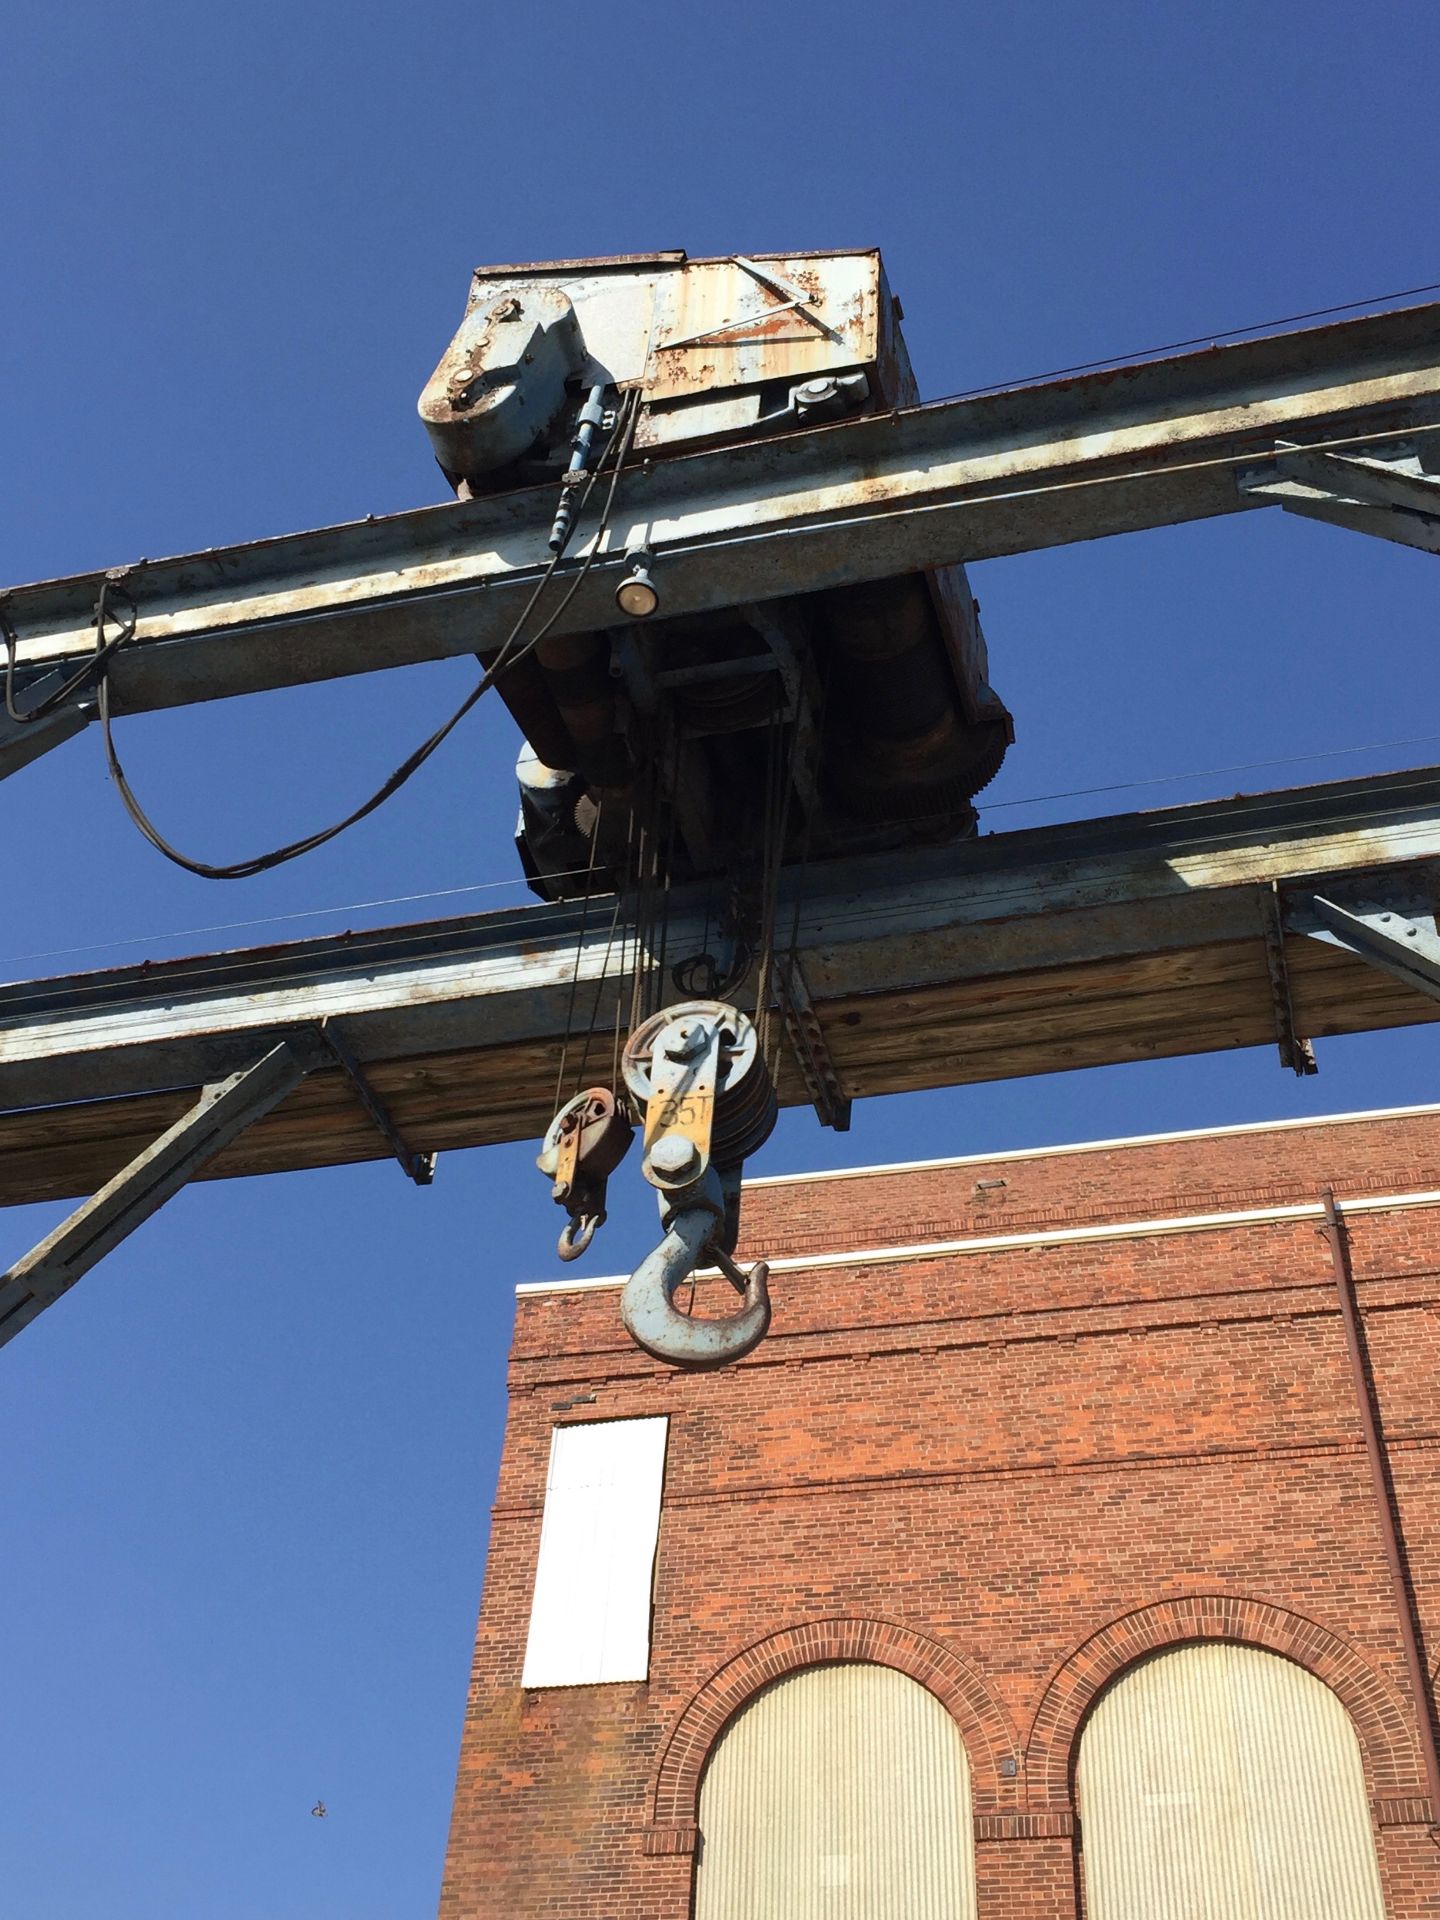 35 Ton / 2T Hoists, Dual Trolley Mounted | Rigging/Loading Fee: Contact Rigger